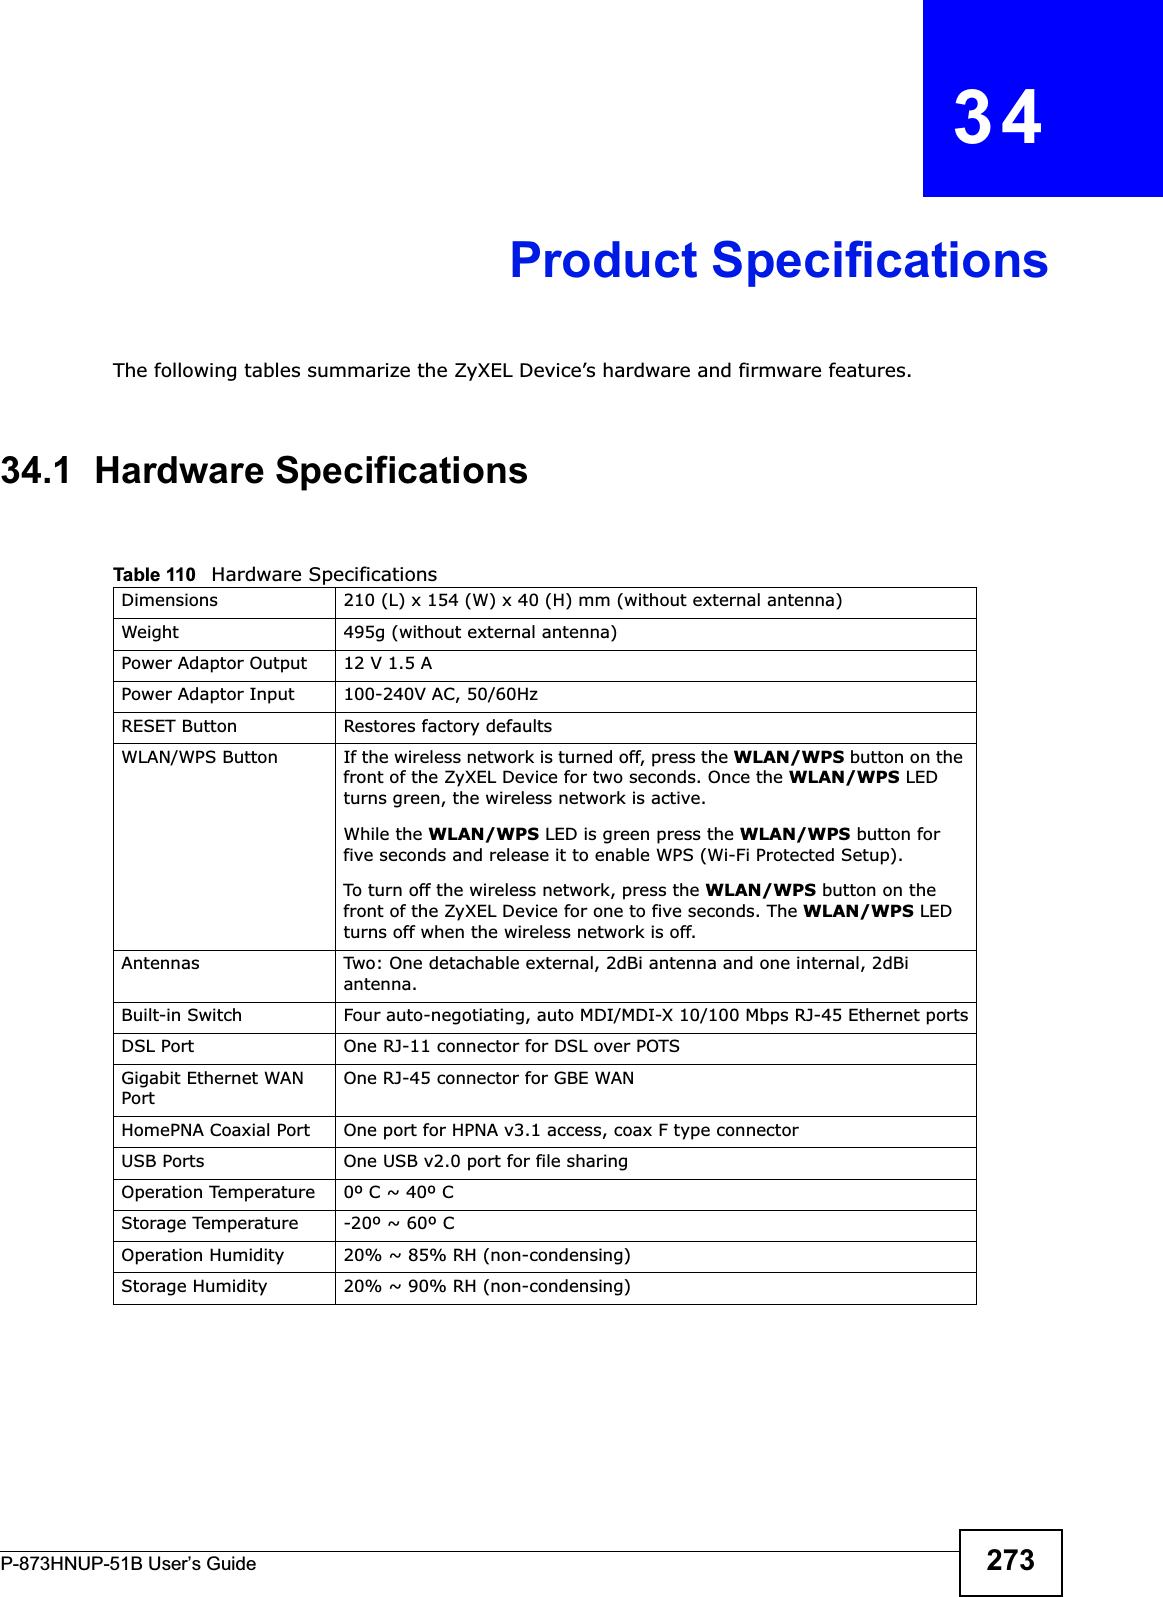 P-873HNUP-51B User’s Guide 273CHAPTER   34Product SpecificationsThe following tables summarize the ZyXEL Device’s hardware and firmware features.34.1  Hardware SpecificationsTable 110   Hardware SpecificationsDimensions 210 (L) x 154 (W) x 40 (H) mm (without external antenna)Weight 495g (without external antenna)Power Adaptor Output 12 V 1.5 APower Adaptor Input 100-240V AC, 50/60HzRESET Button Restores factory defaultsWLAN/WPS Button  If the wireless network is turned off, press the WLAN/WPS button on the front of the ZyXEL Device for two seconds. Once the WLAN/WPS LED turns green, the wireless network is active.While the WLAN/WPS LED is green press the WLAN/WPS button for five seconds and release it to enable WPS (Wi-Fi Protected Setup).To turn off the wireless network, press the WLAN/WPS button on the front of the ZyXEL Device for one to five seconds. The WLAN/WPS LED turns off when the wireless network is off.Antennas Two: One detachable external, 2dBi antenna and one internal, 2dBi antenna.Built-in Switch Four auto-negotiating, auto MDI/MDI-X 10/100 Mbps RJ-45 Ethernet portsDSL Port One RJ-11 connector for DSL over POTSGigabit Ethernet WAN PortOne RJ-45 connector for GBE WANHomePNA Coaxial Port One port for HPNA v3.1 access, coax F type connectorUSB Ports One USB v2.0 port for file sharingOperation Temperature 0º C ~ 40º CStorage Temperature -20º ~ 60º COperation Humidity 20% ~ 85% RH (non-condensing)Storage Humidity 20% ~ 90% RH (non-condensing)